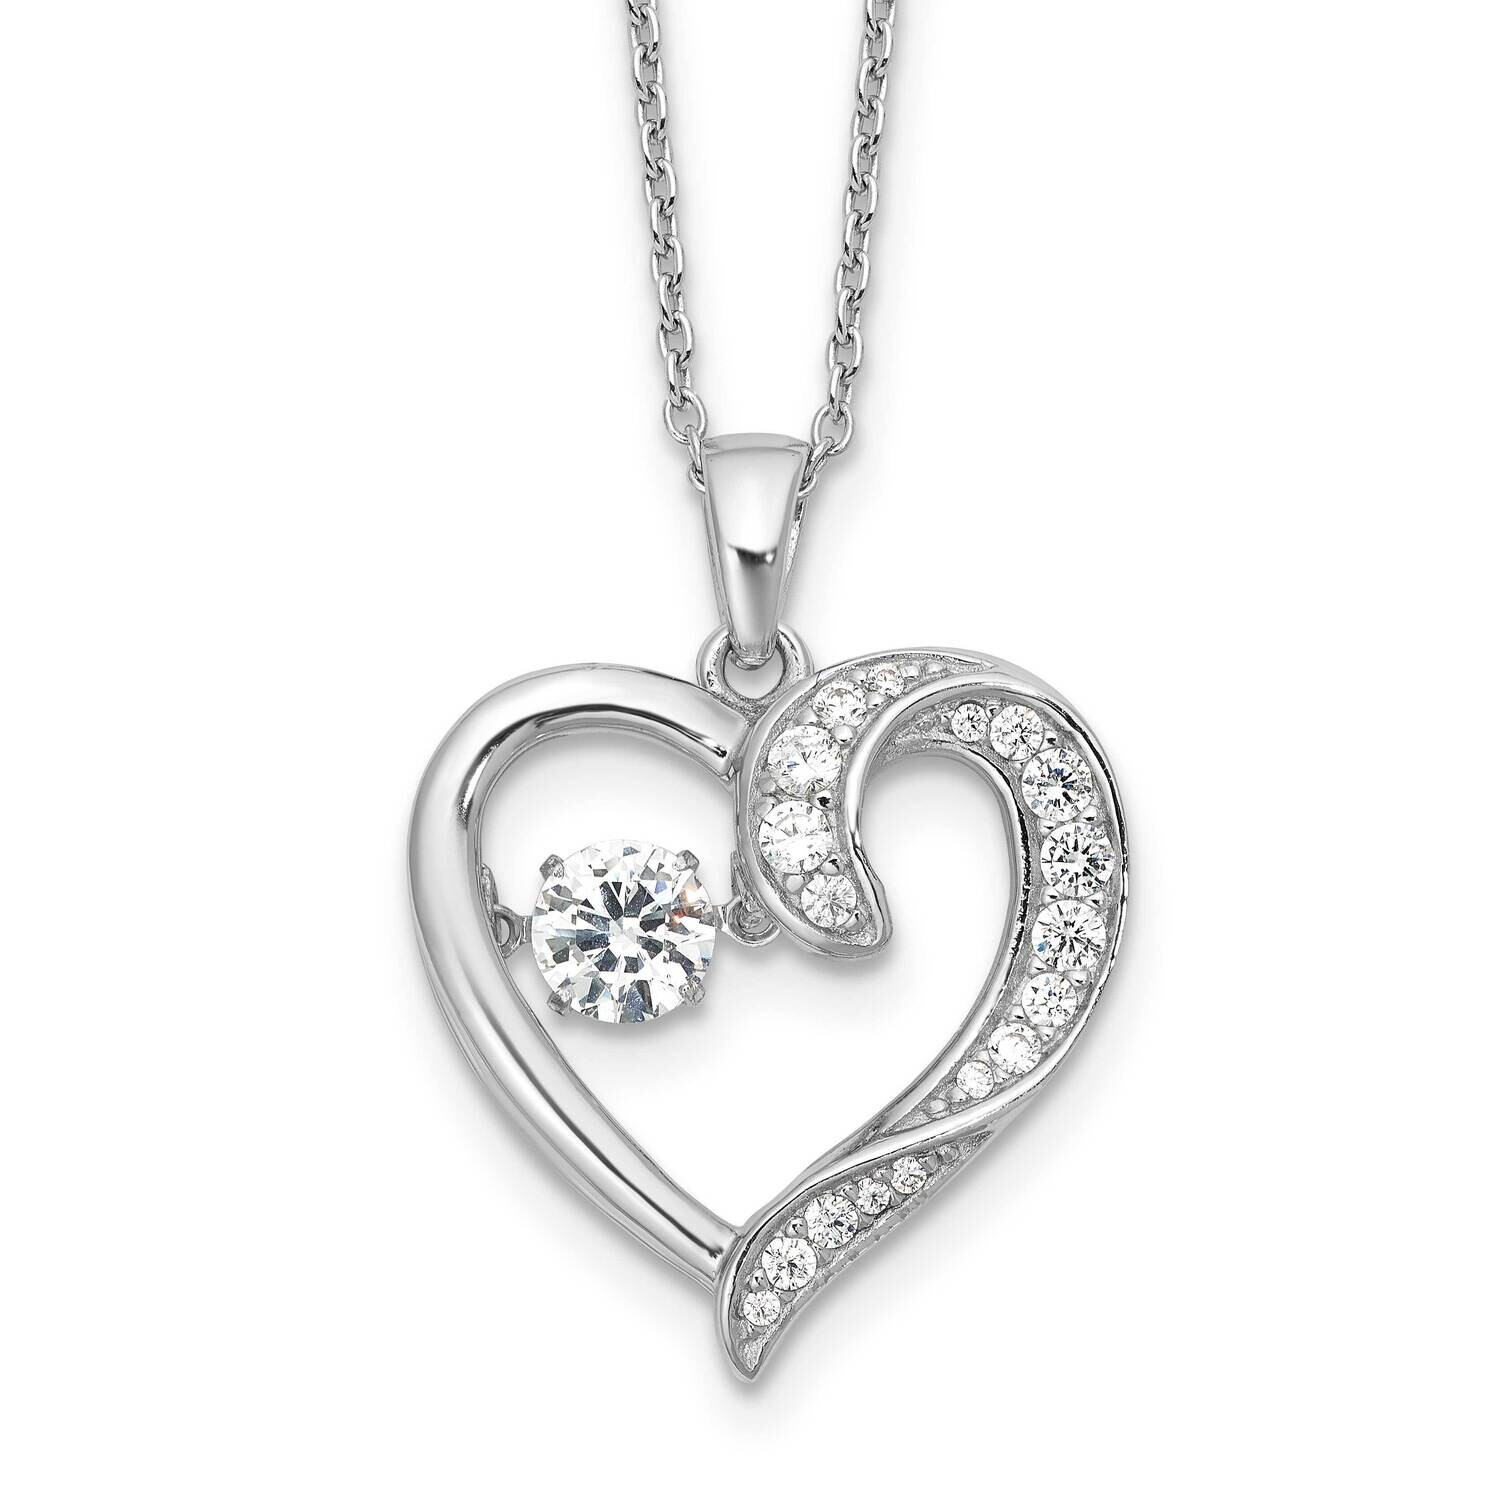 Cheryl M Brilliant-Cut Vibrant CZ Heart 18 Inch Necklace 2 Inch Extender Sterling Silver Rhodium-Plated QCM1614-18